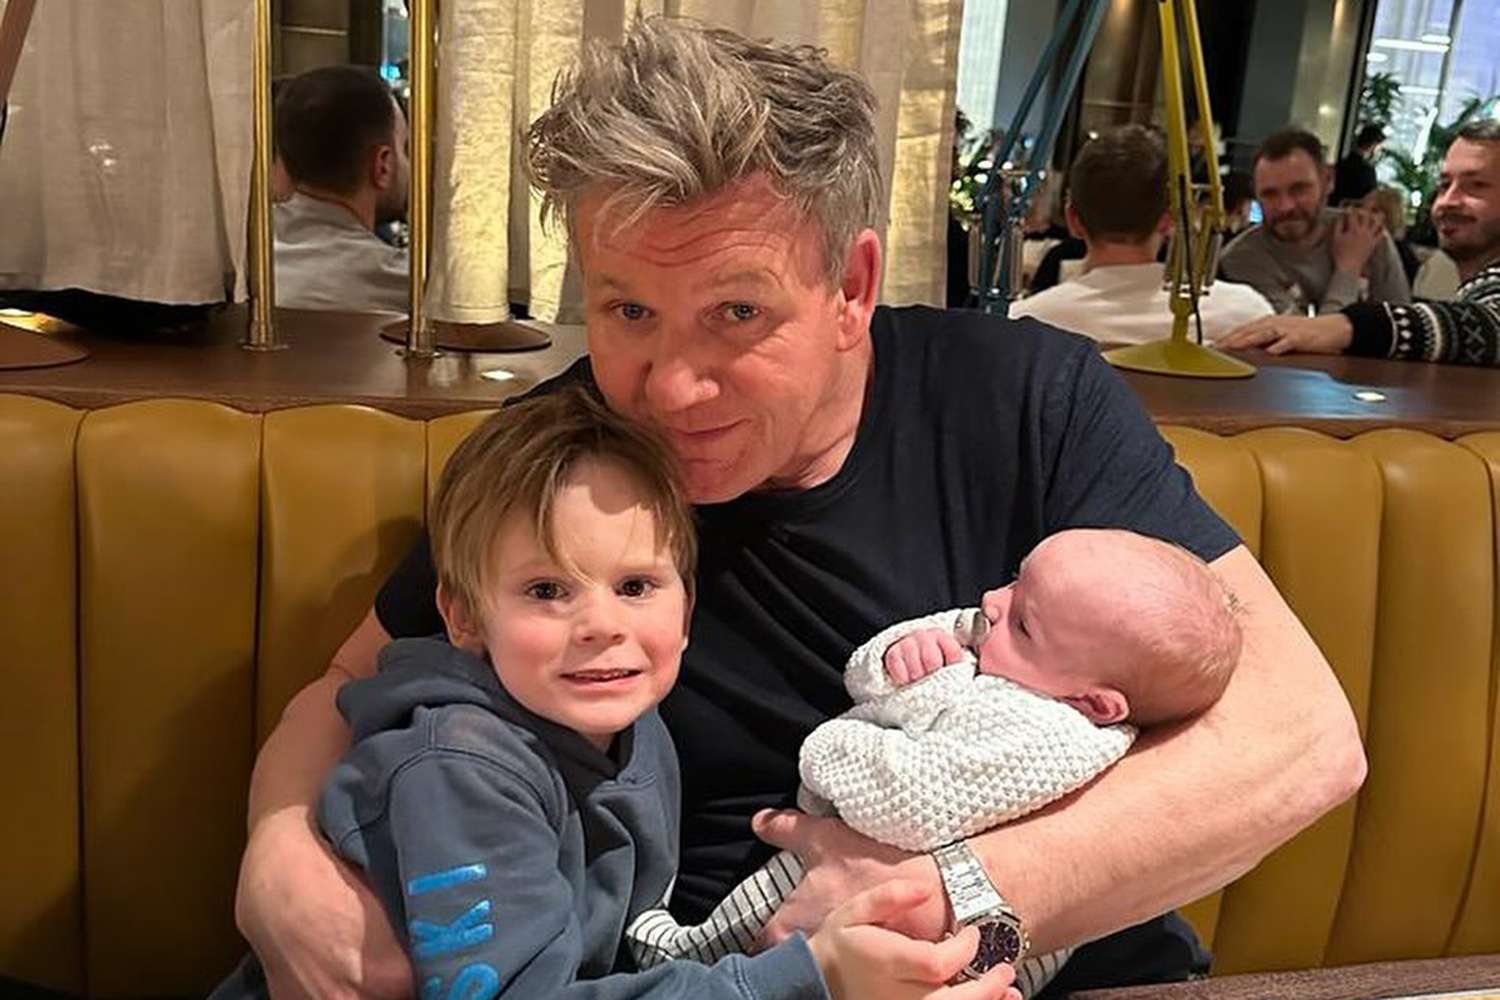 Gordon Ramsay Admits He's a 'Better Dad This Time' with His Younger Kids: 'Got Experience Now' (Exclusive)